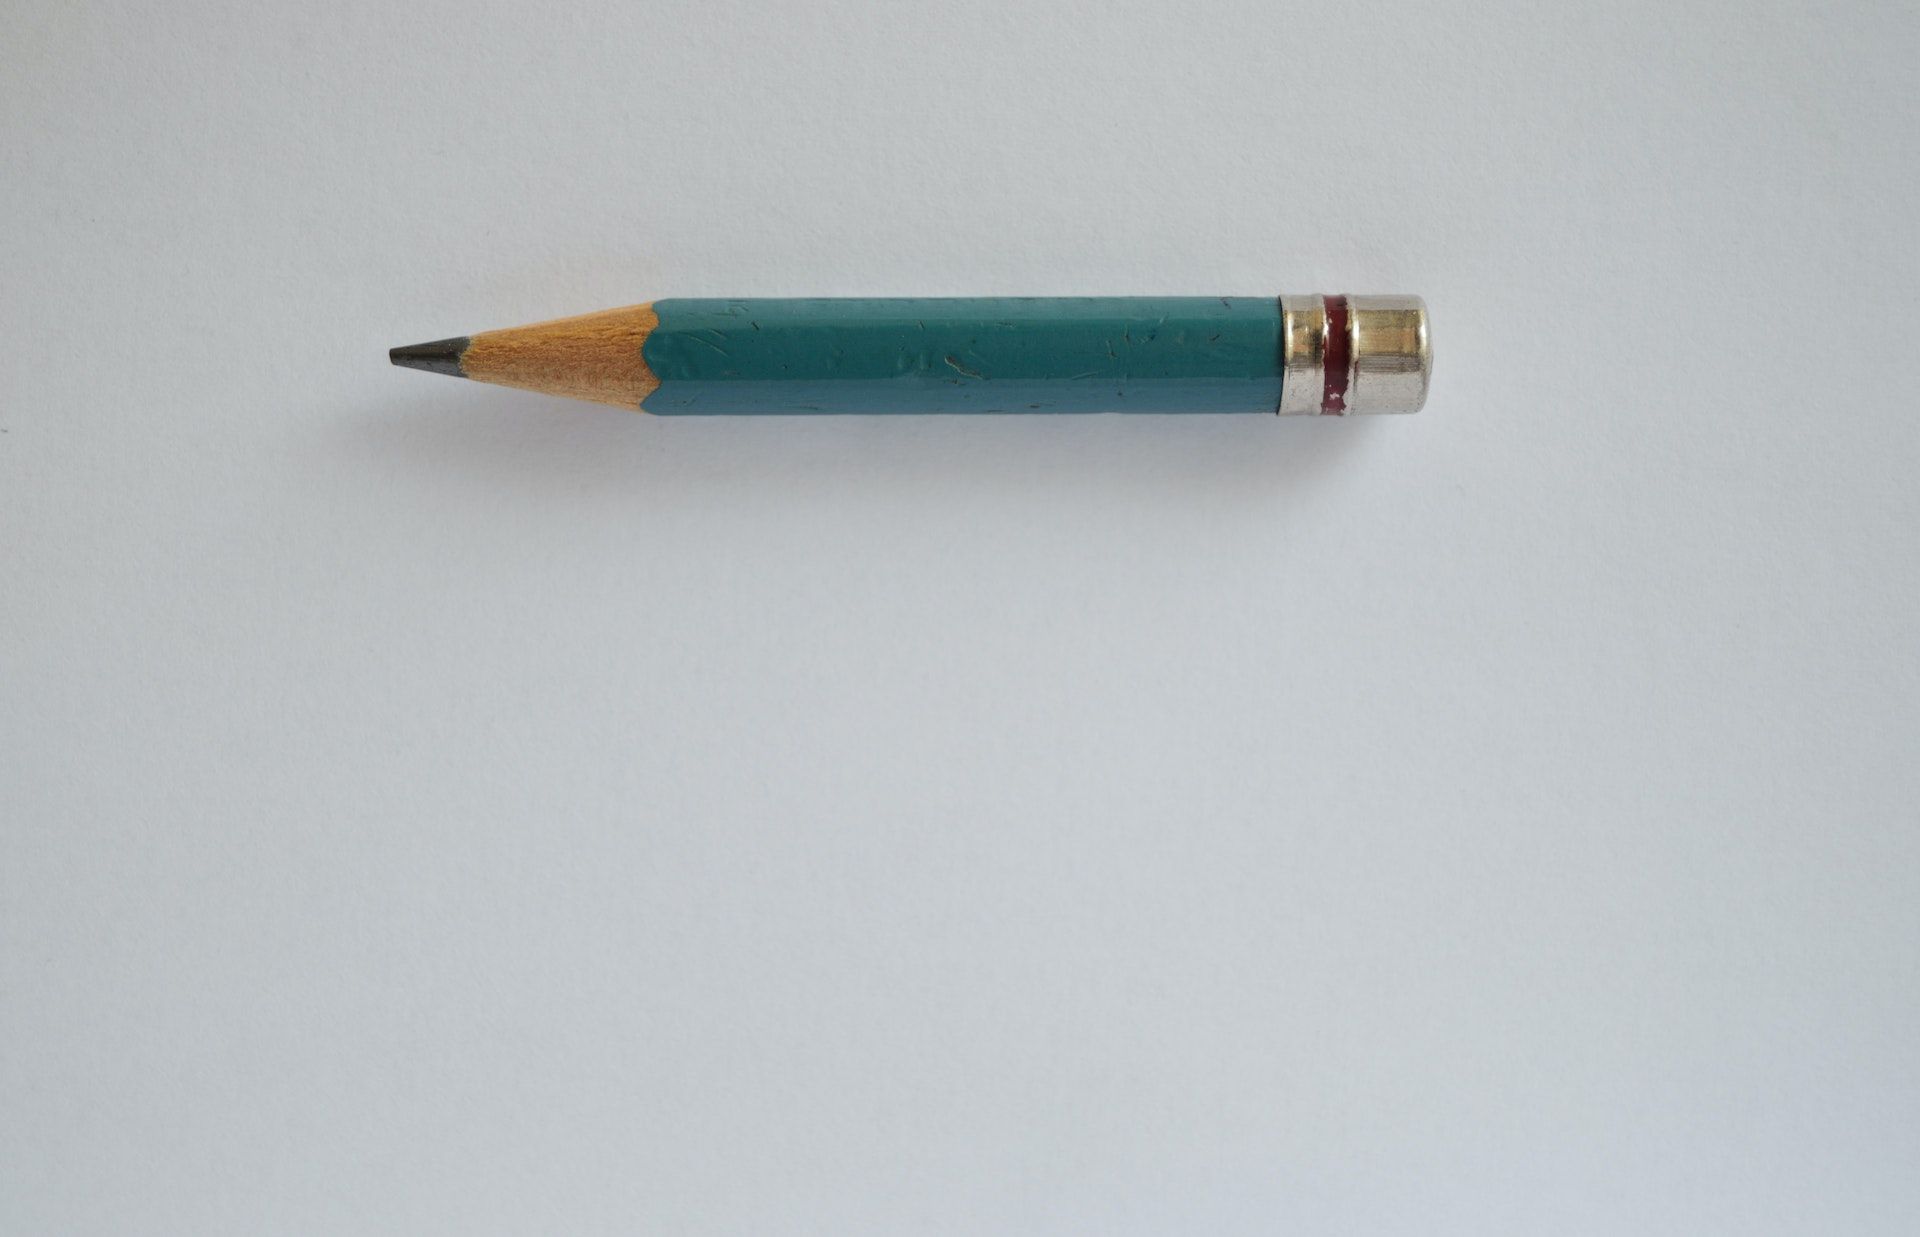 A single pencil on a grey background